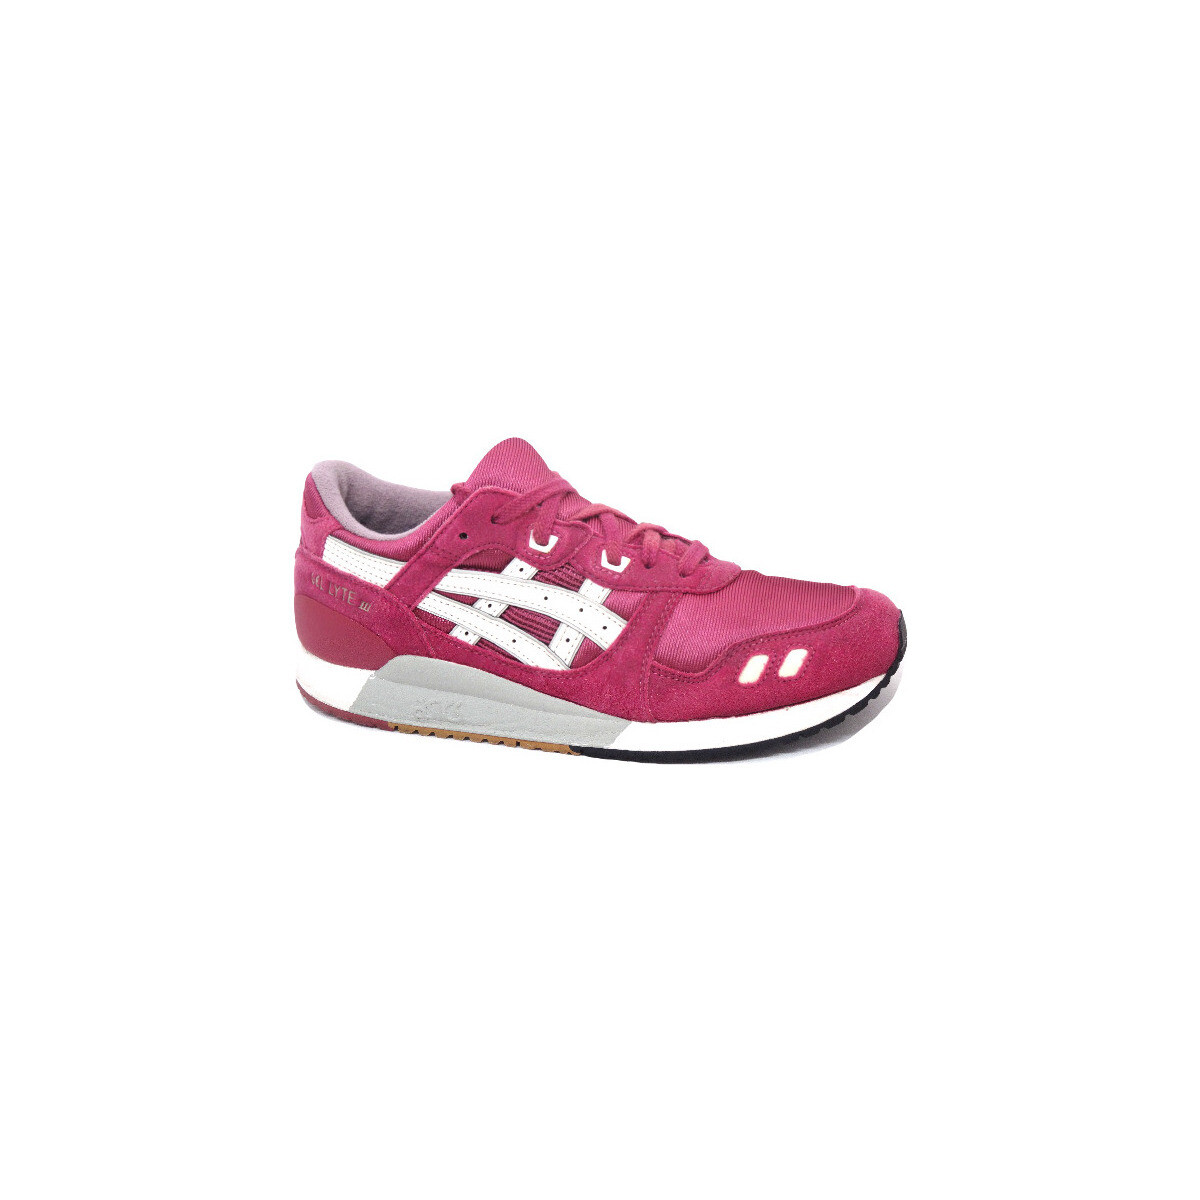 Chaussures Baskets mode Asics Reconditionné Gel lyte III - Rose